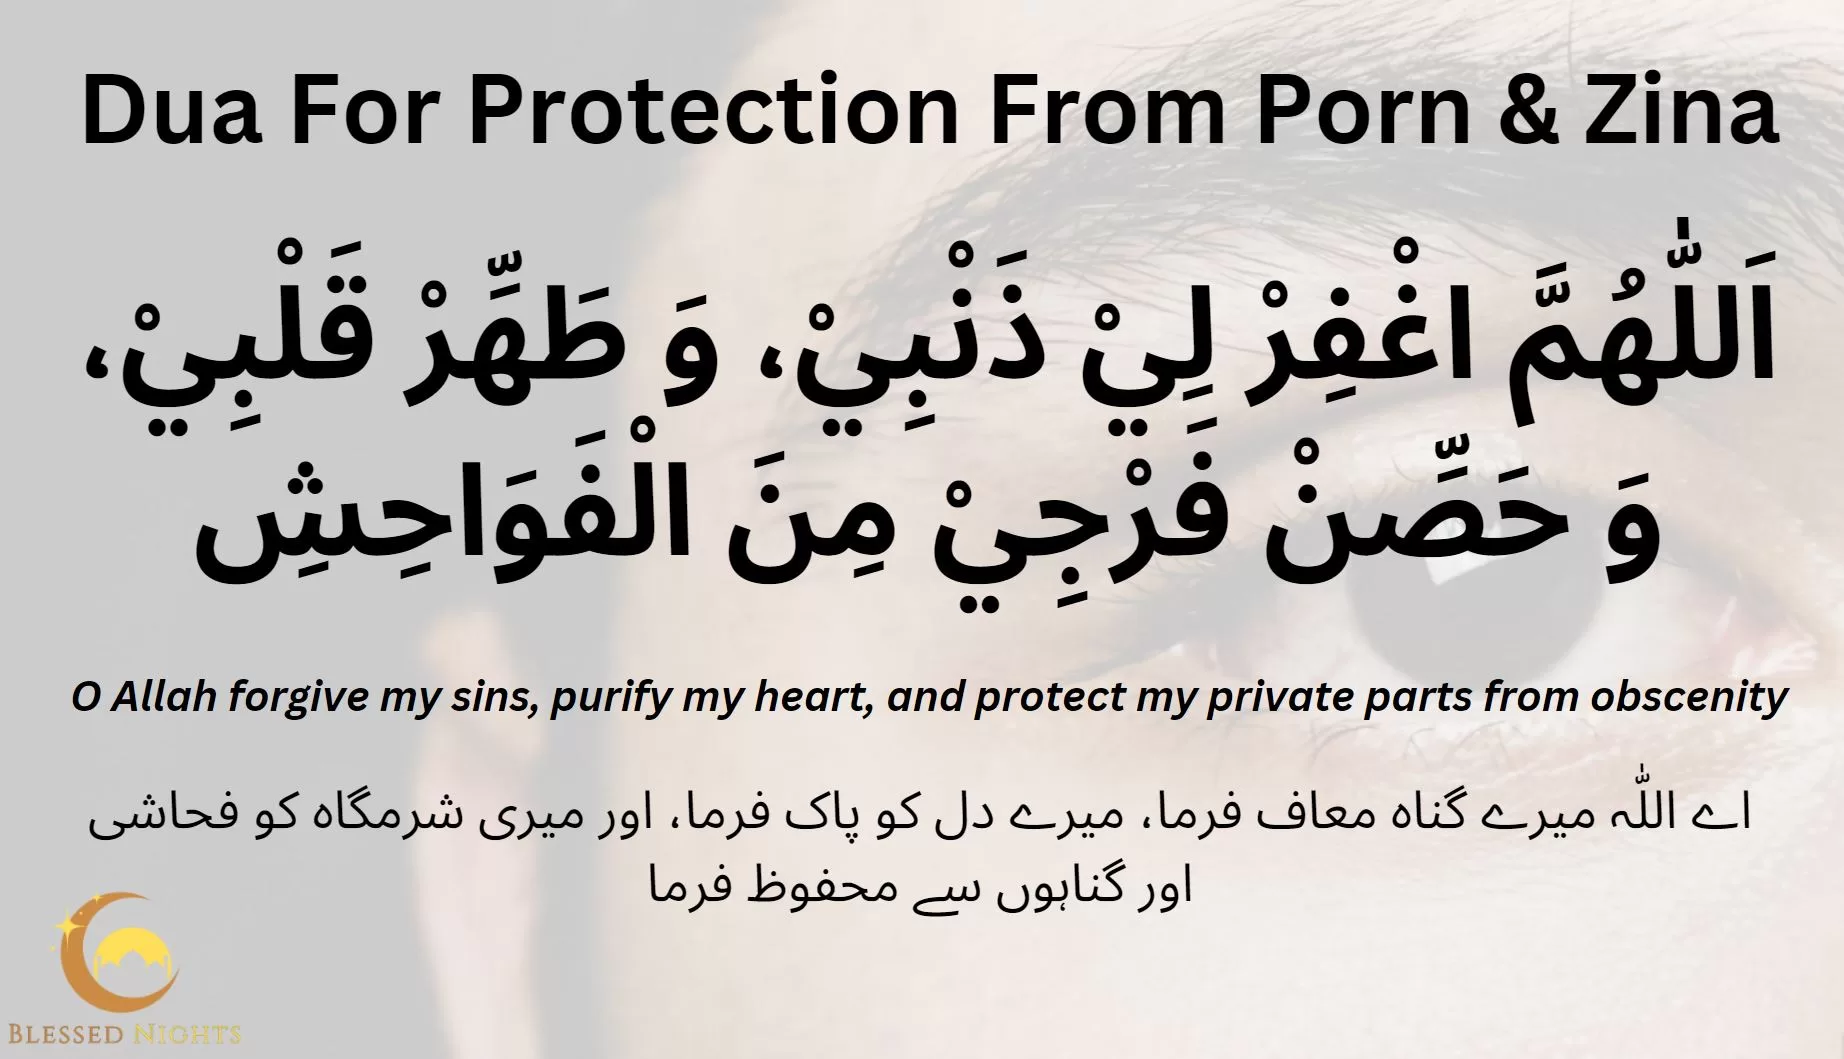 Hajj Girl X Video New - Dua To Stop Porn Addiction And Seek Protection From Zina